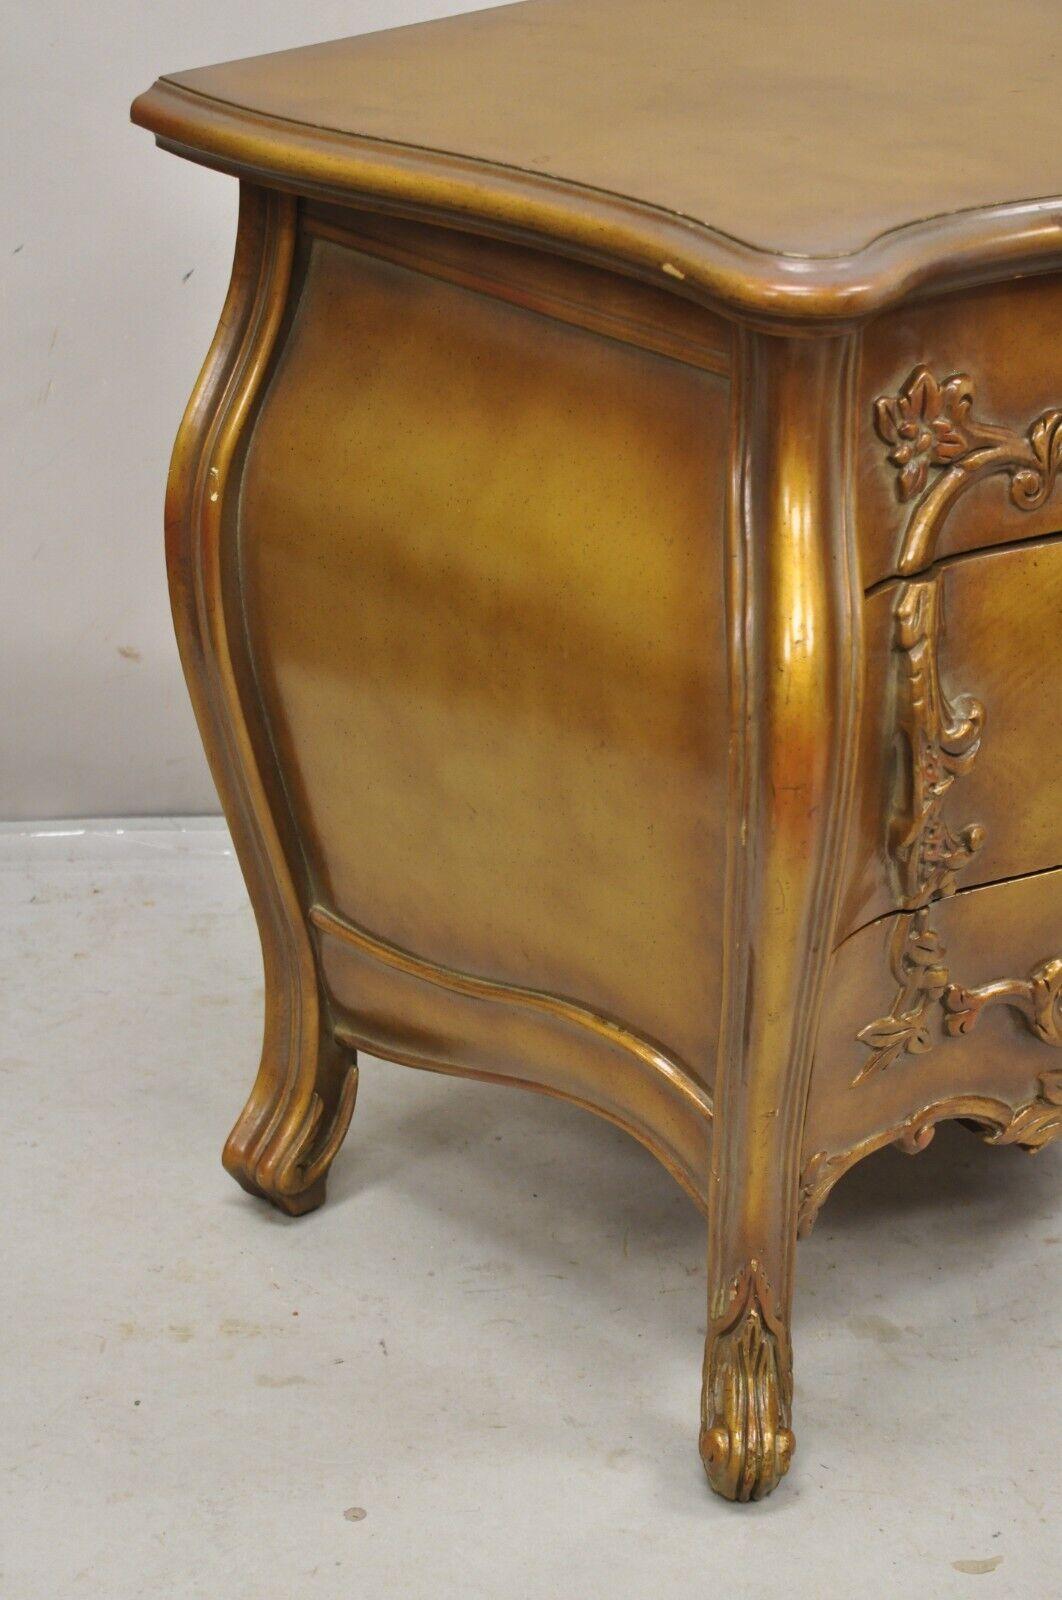 Vintage French Rococo Baroque Style Gold Gilt Bombe Nightstands - a Pair For Sale 4